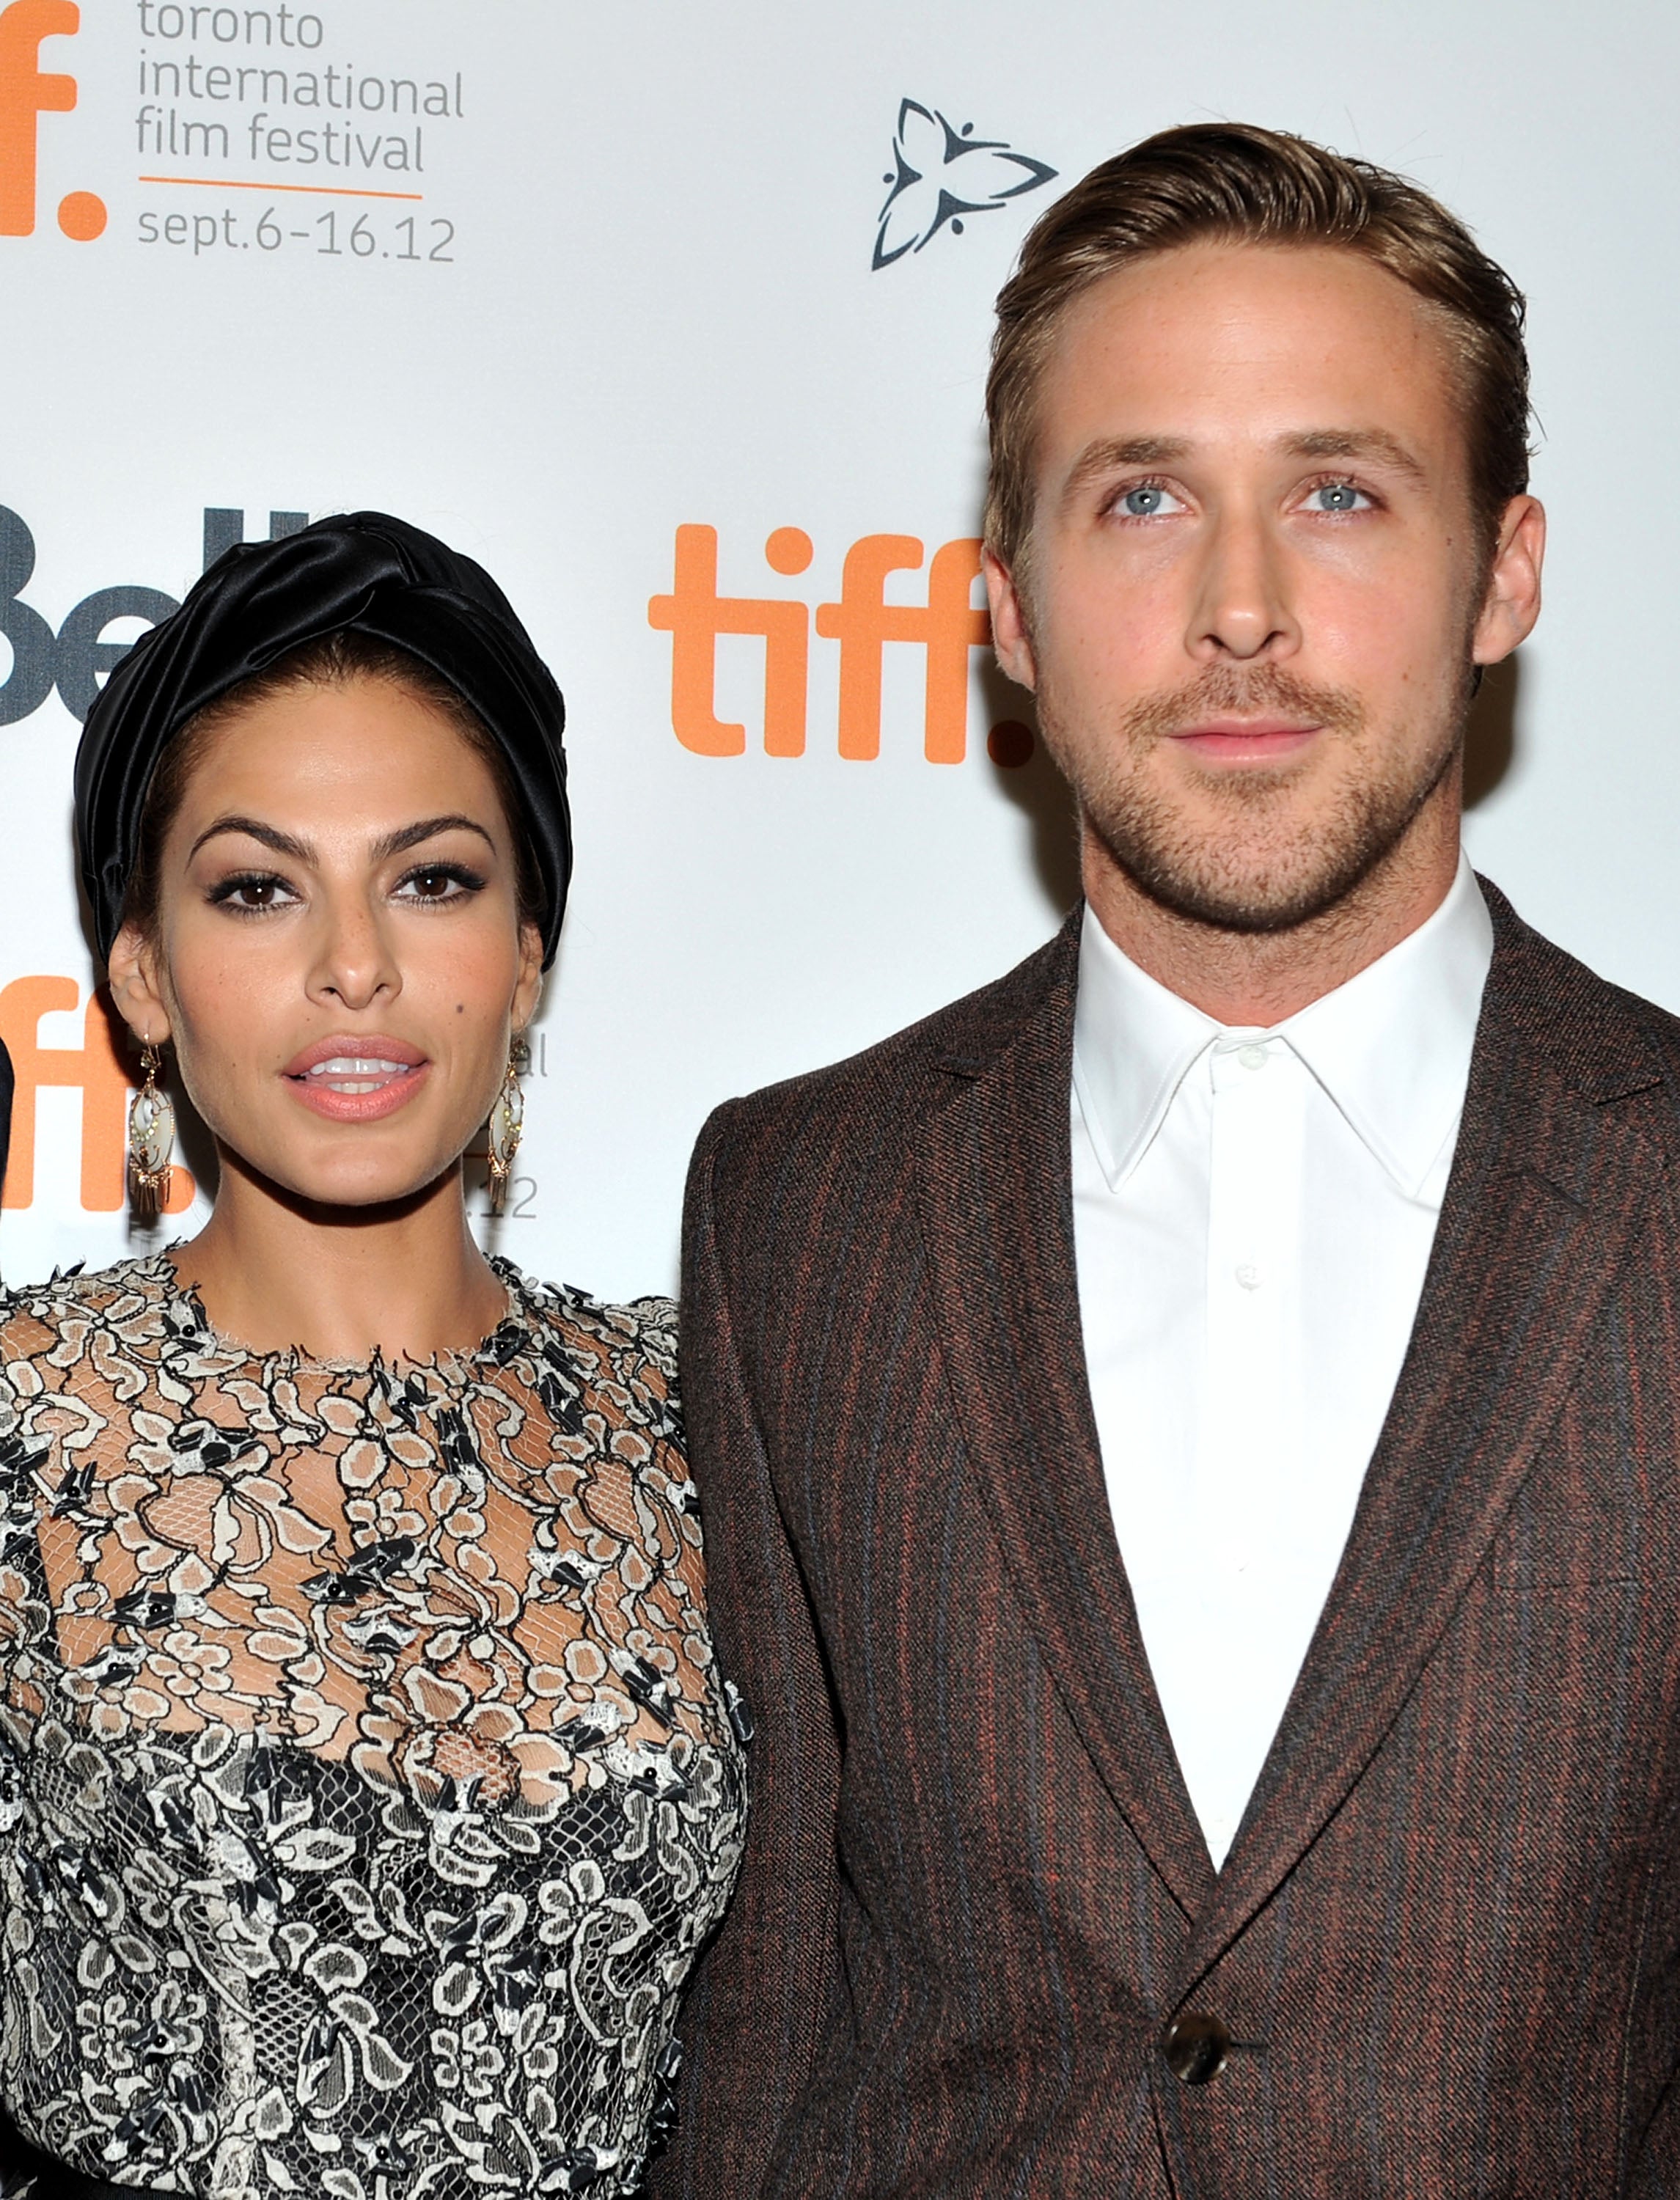 Ryan Gosling and Eva Mendes keep their family and relationship out of the public eye